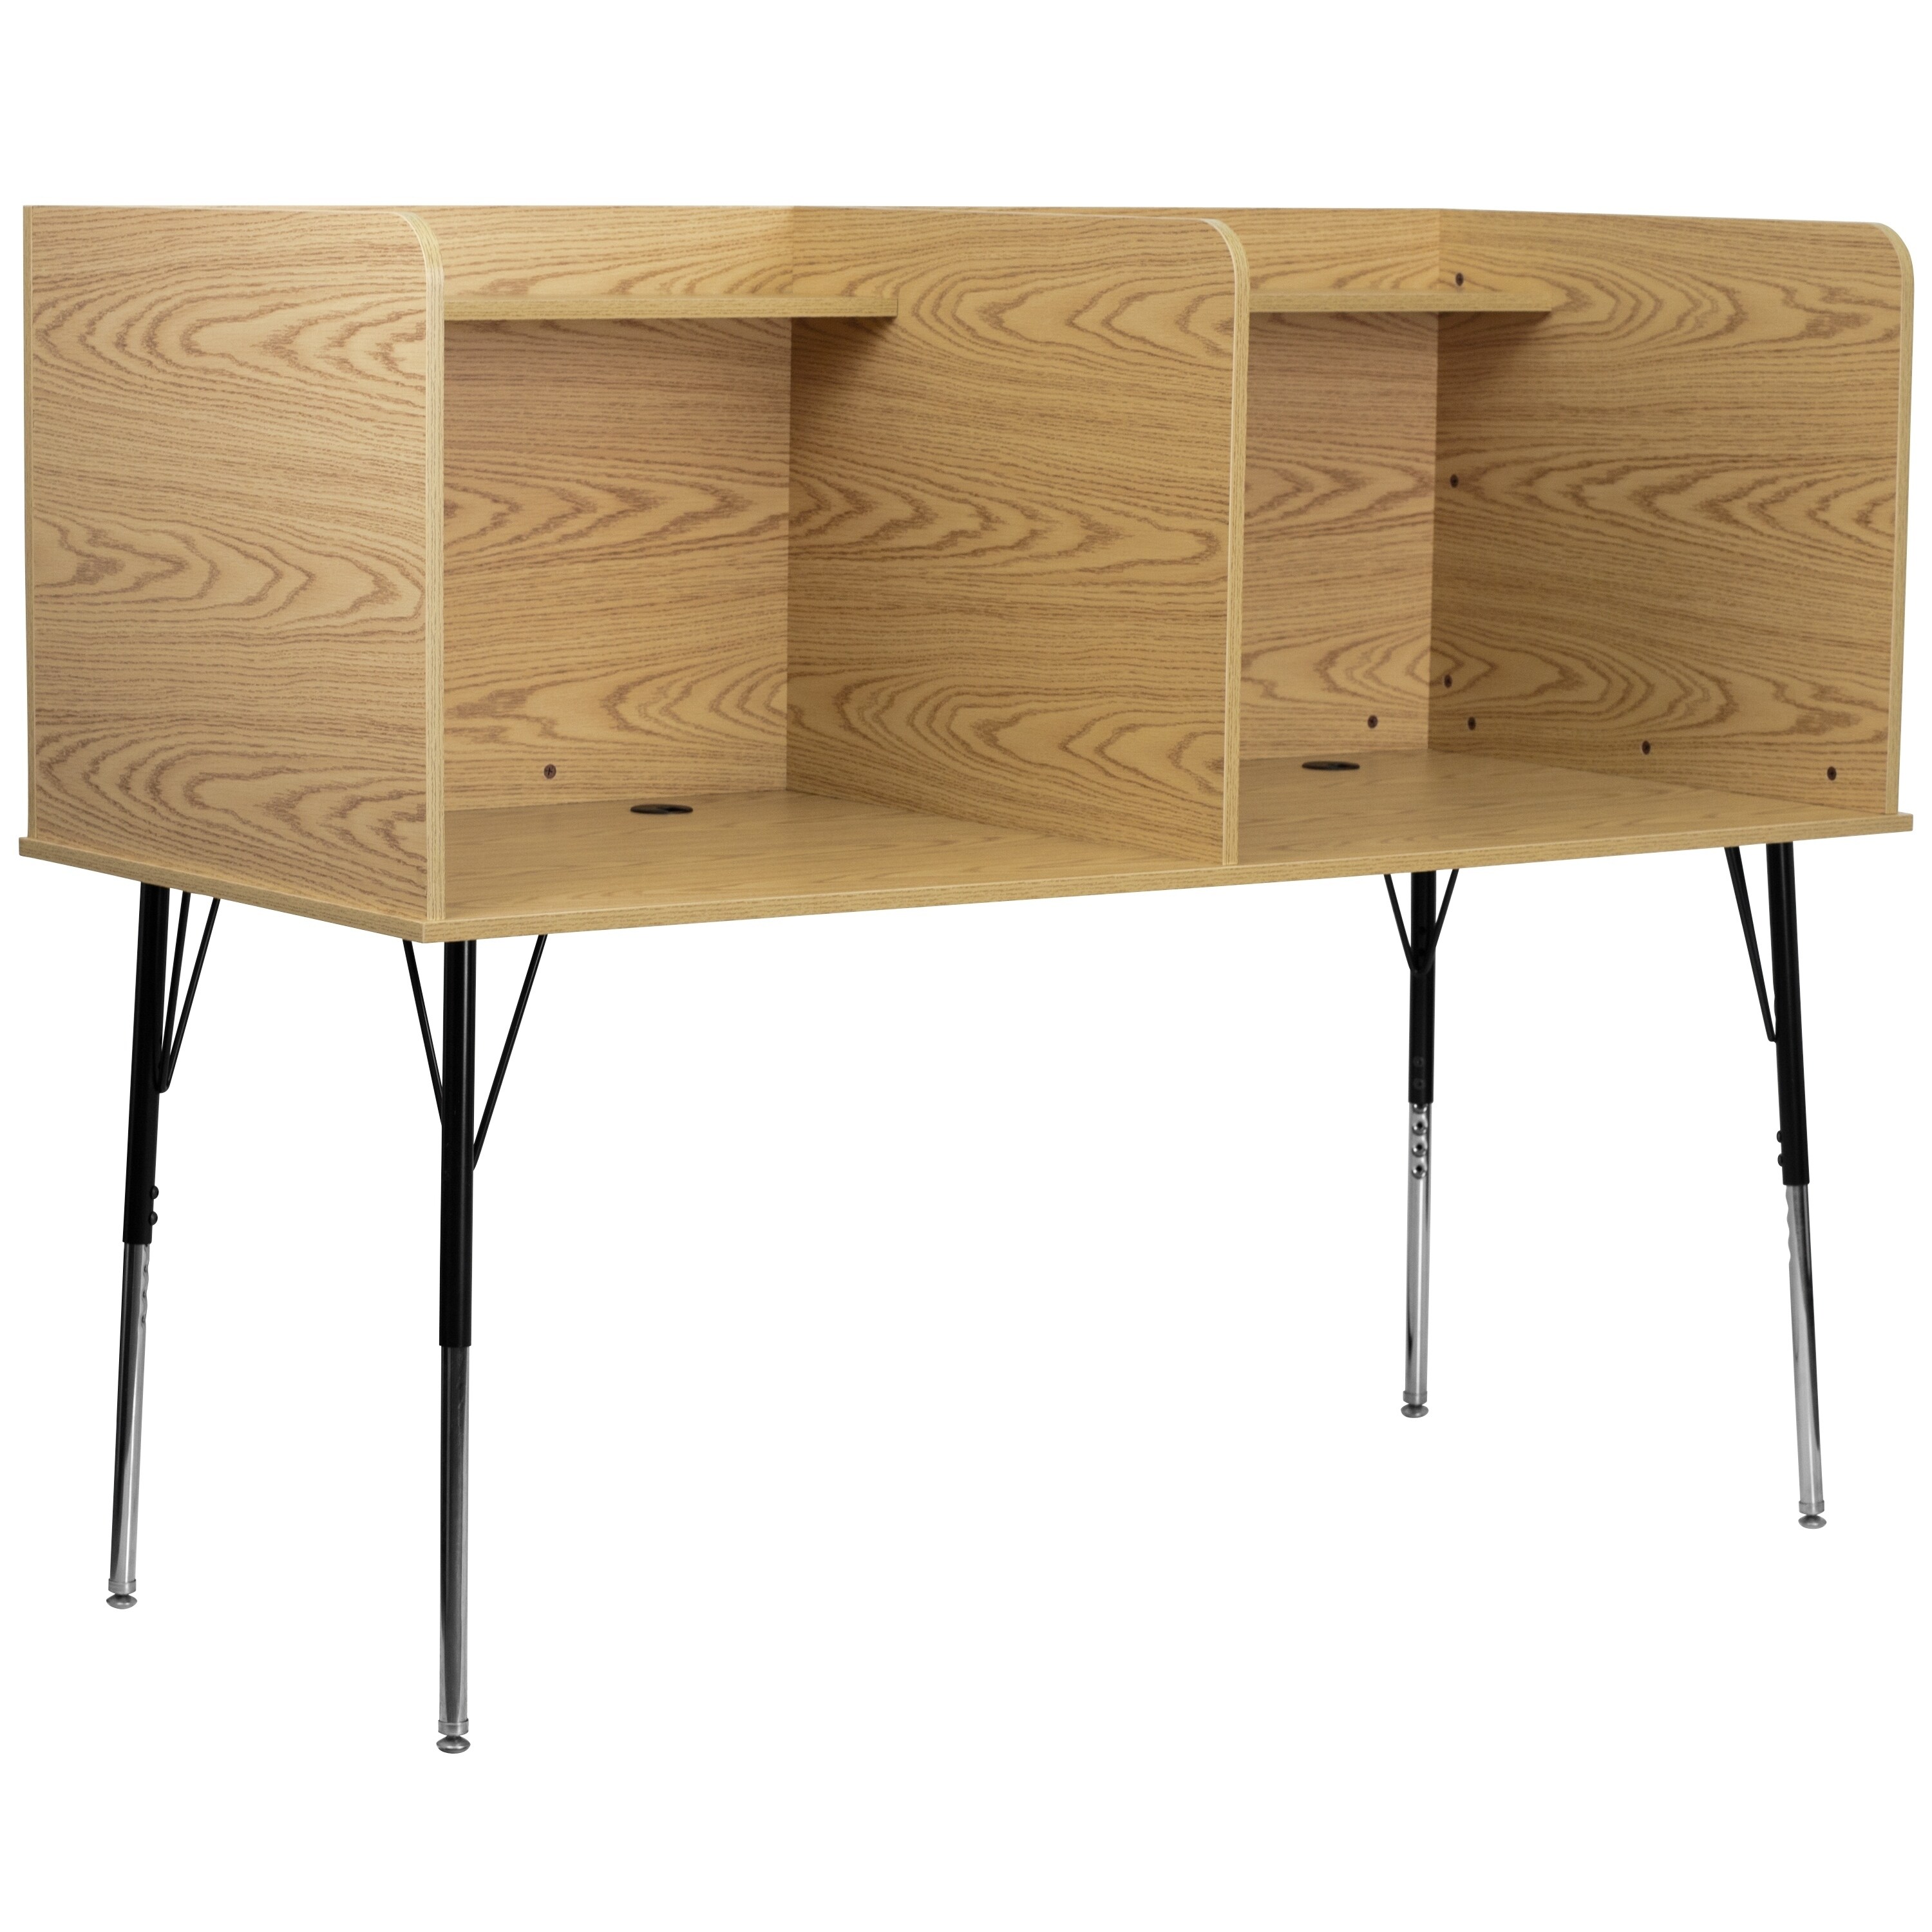 Shop Double Wide Study Carrel With Adjustable Legs And Top Shelf